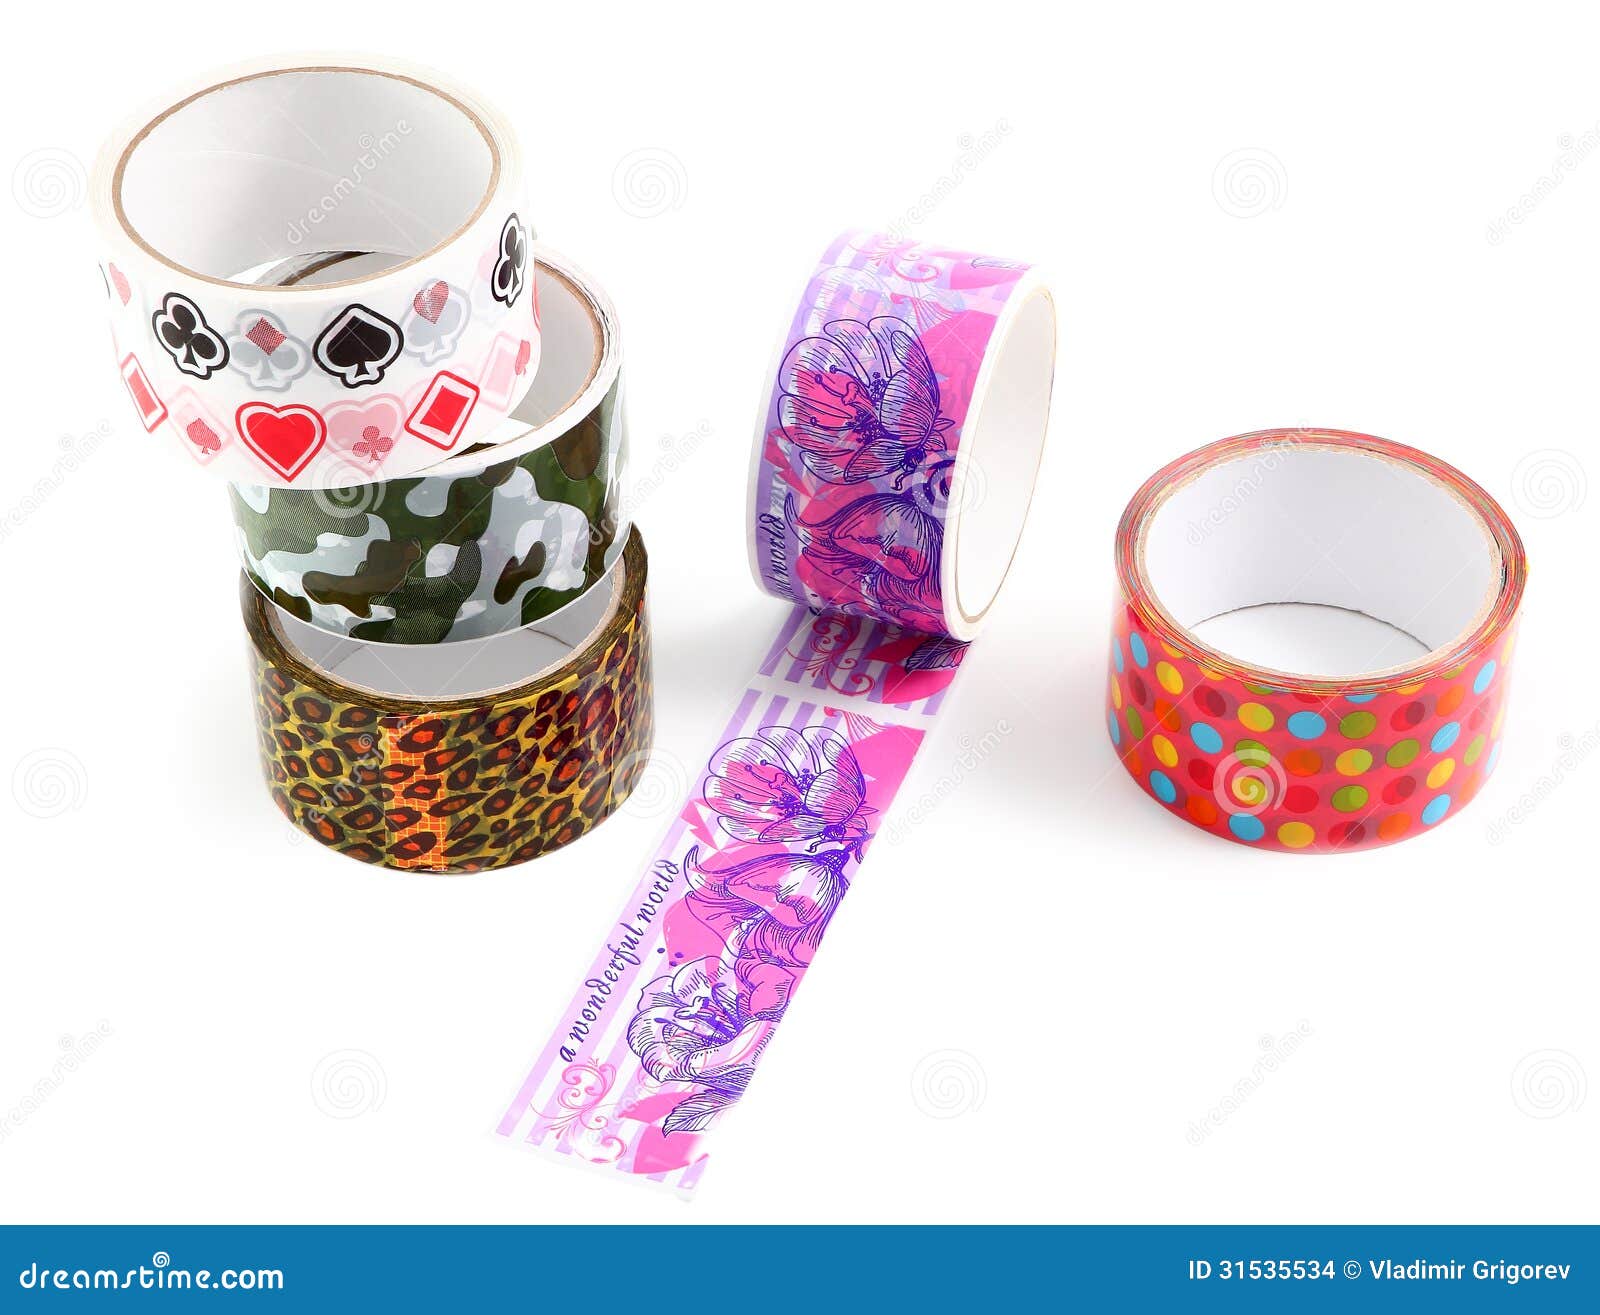 Packing Tape With Print. Masking Tape For Gift Wrapping. A ...